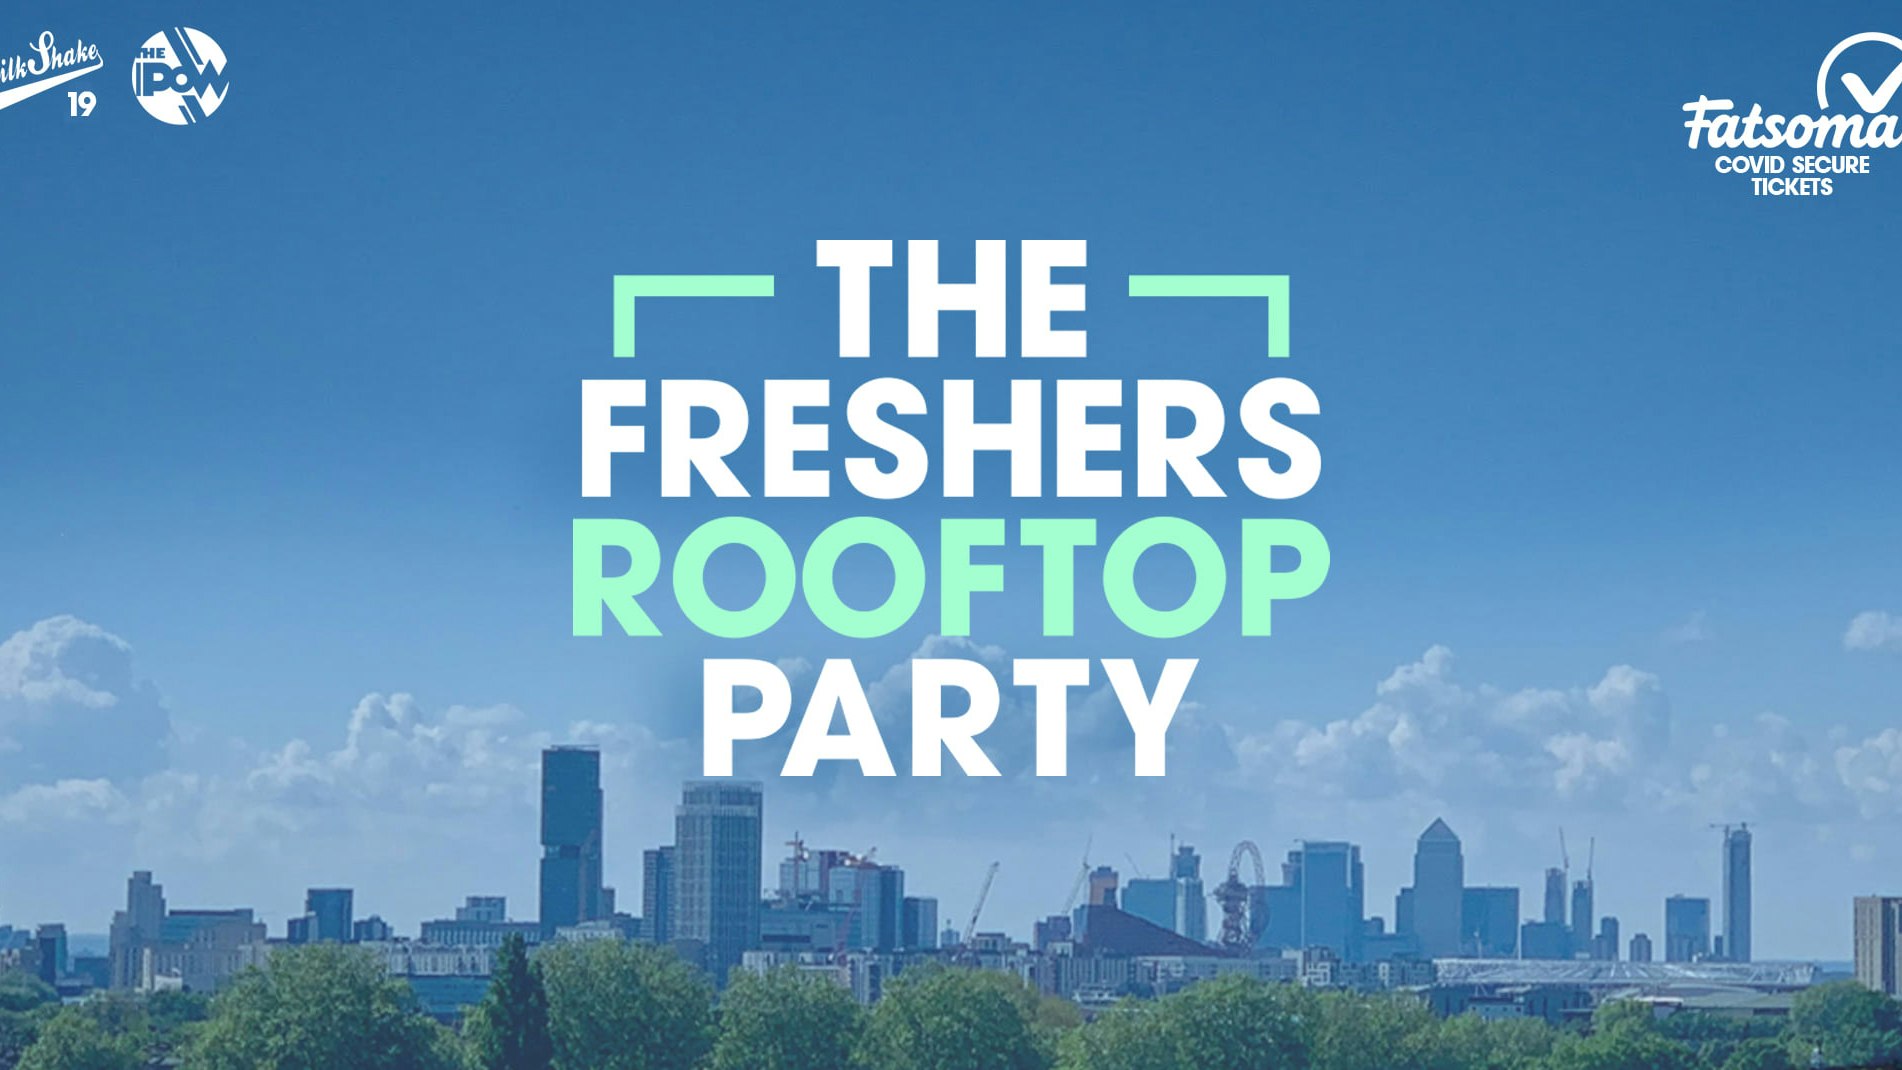 The London Freshers Rooftop Party 🌞🍹Tickets Back Online Now!